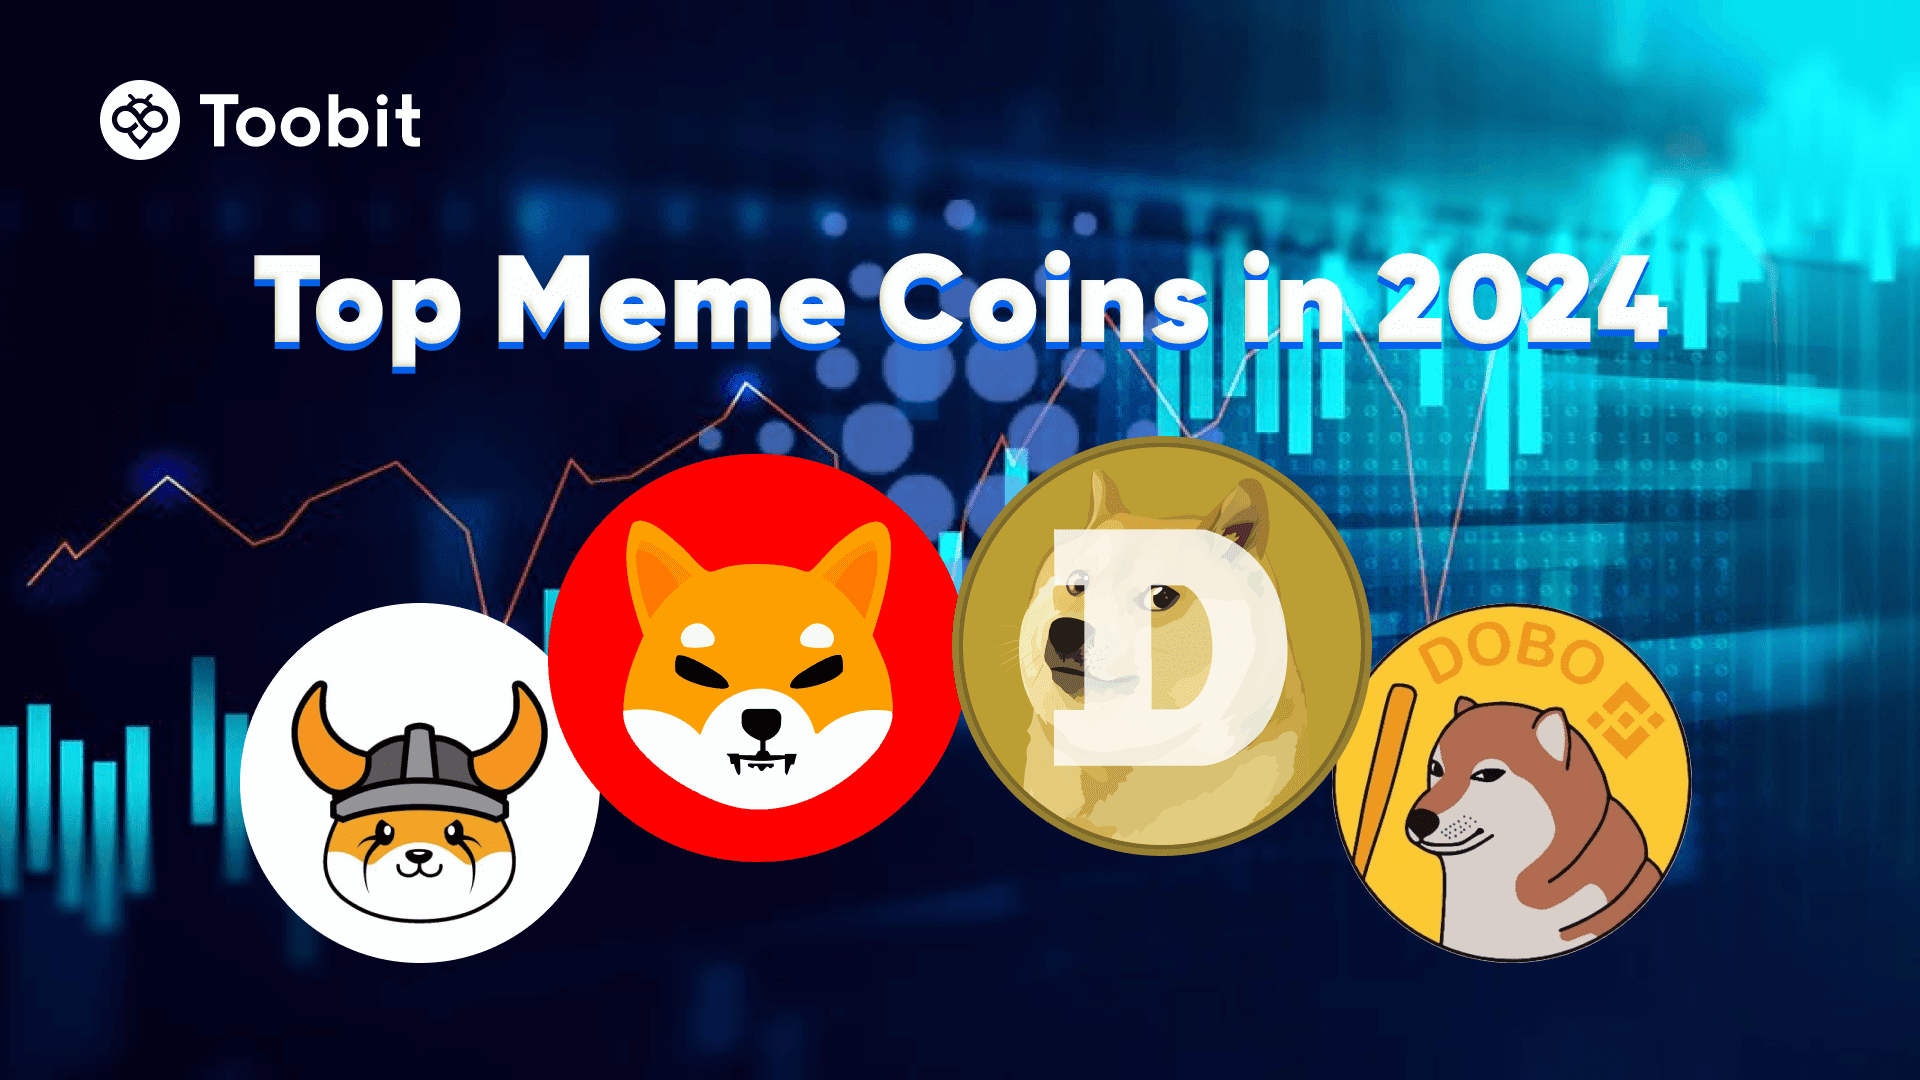 Top Memecoins to Watch in 2024, as Selected by Toobit Cryptocurrency Analysis Firm